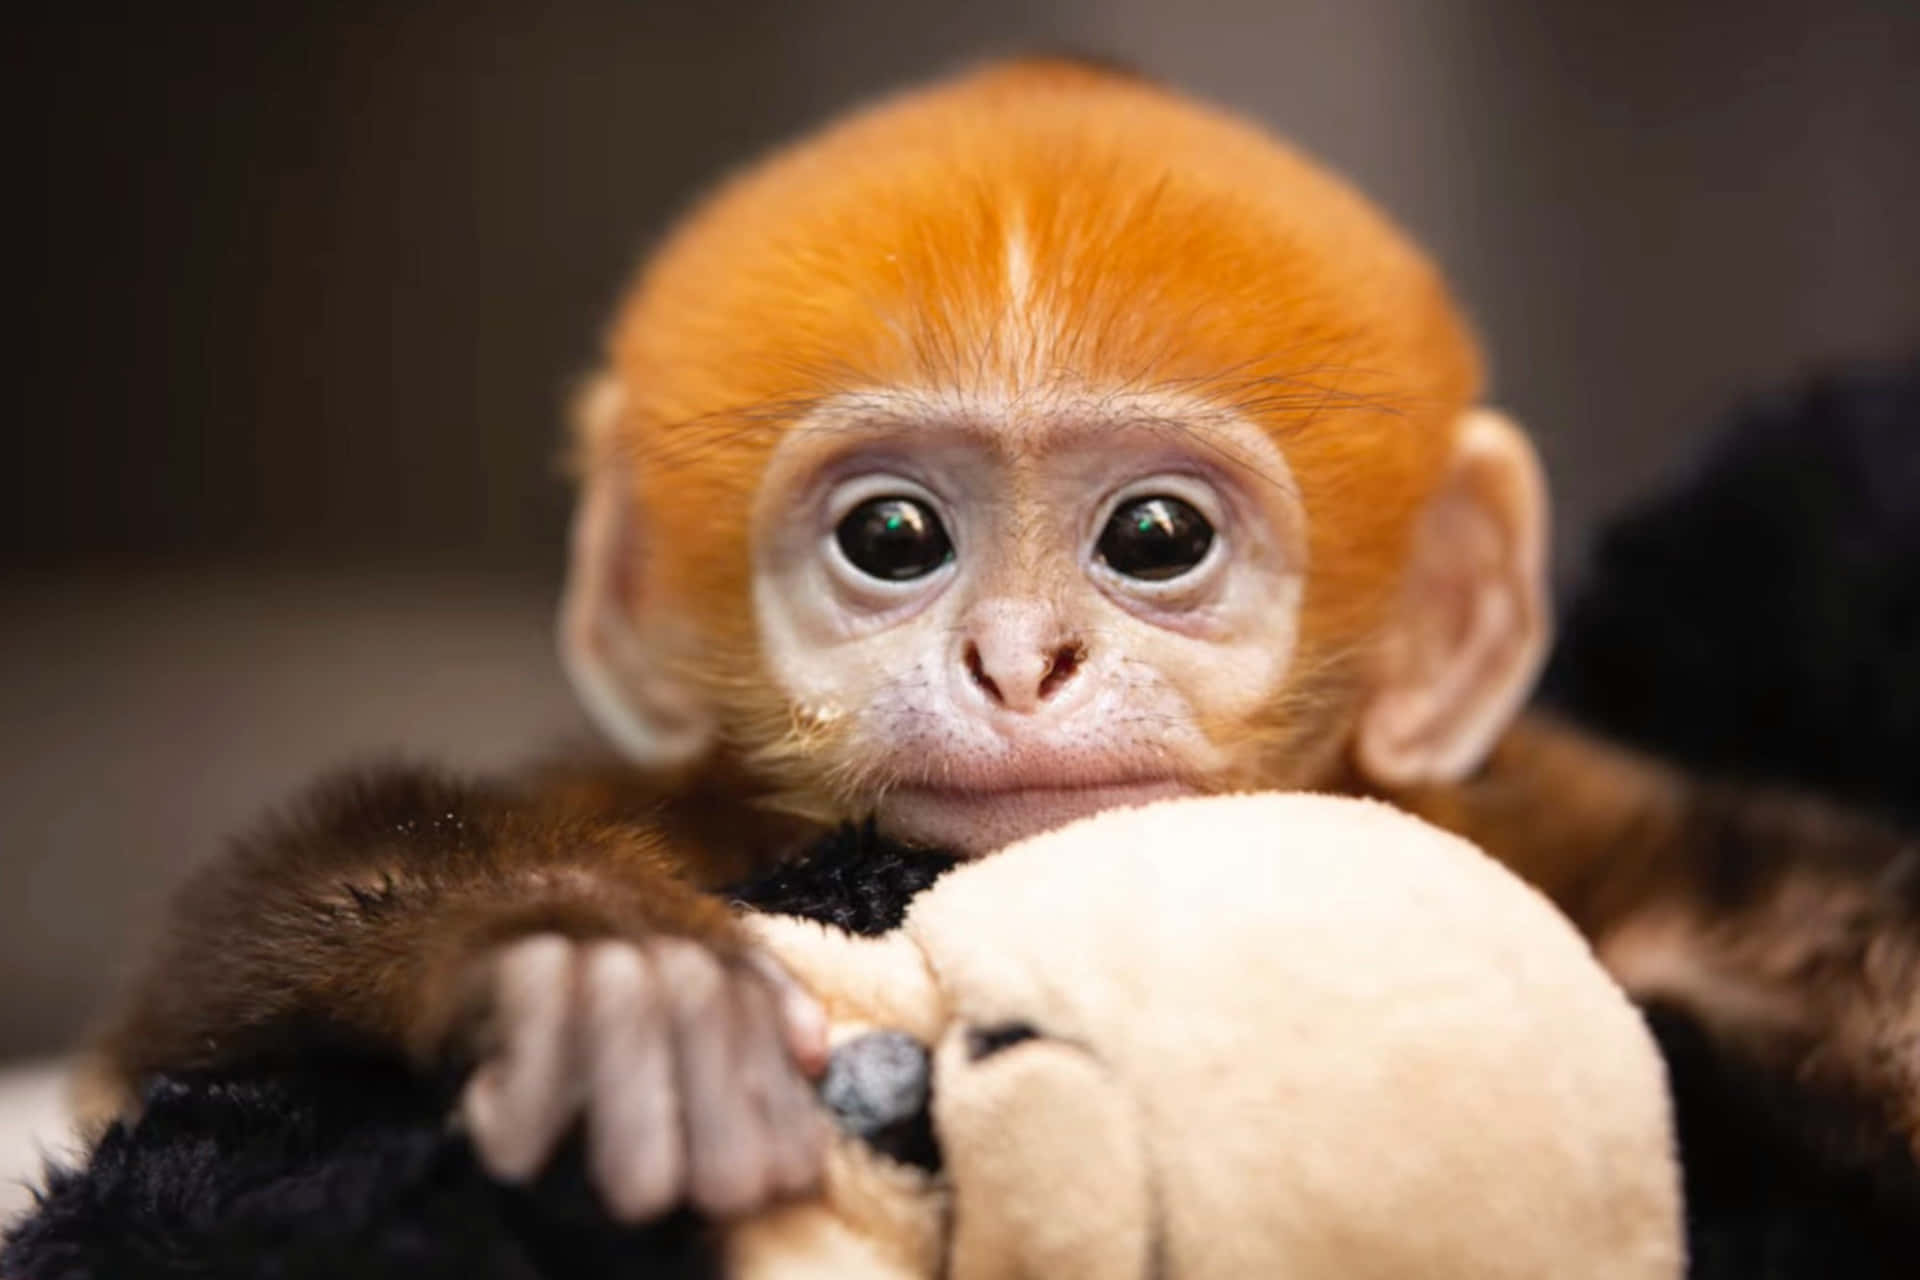 A Baby Monkey Is Holding A Stuffed Animal